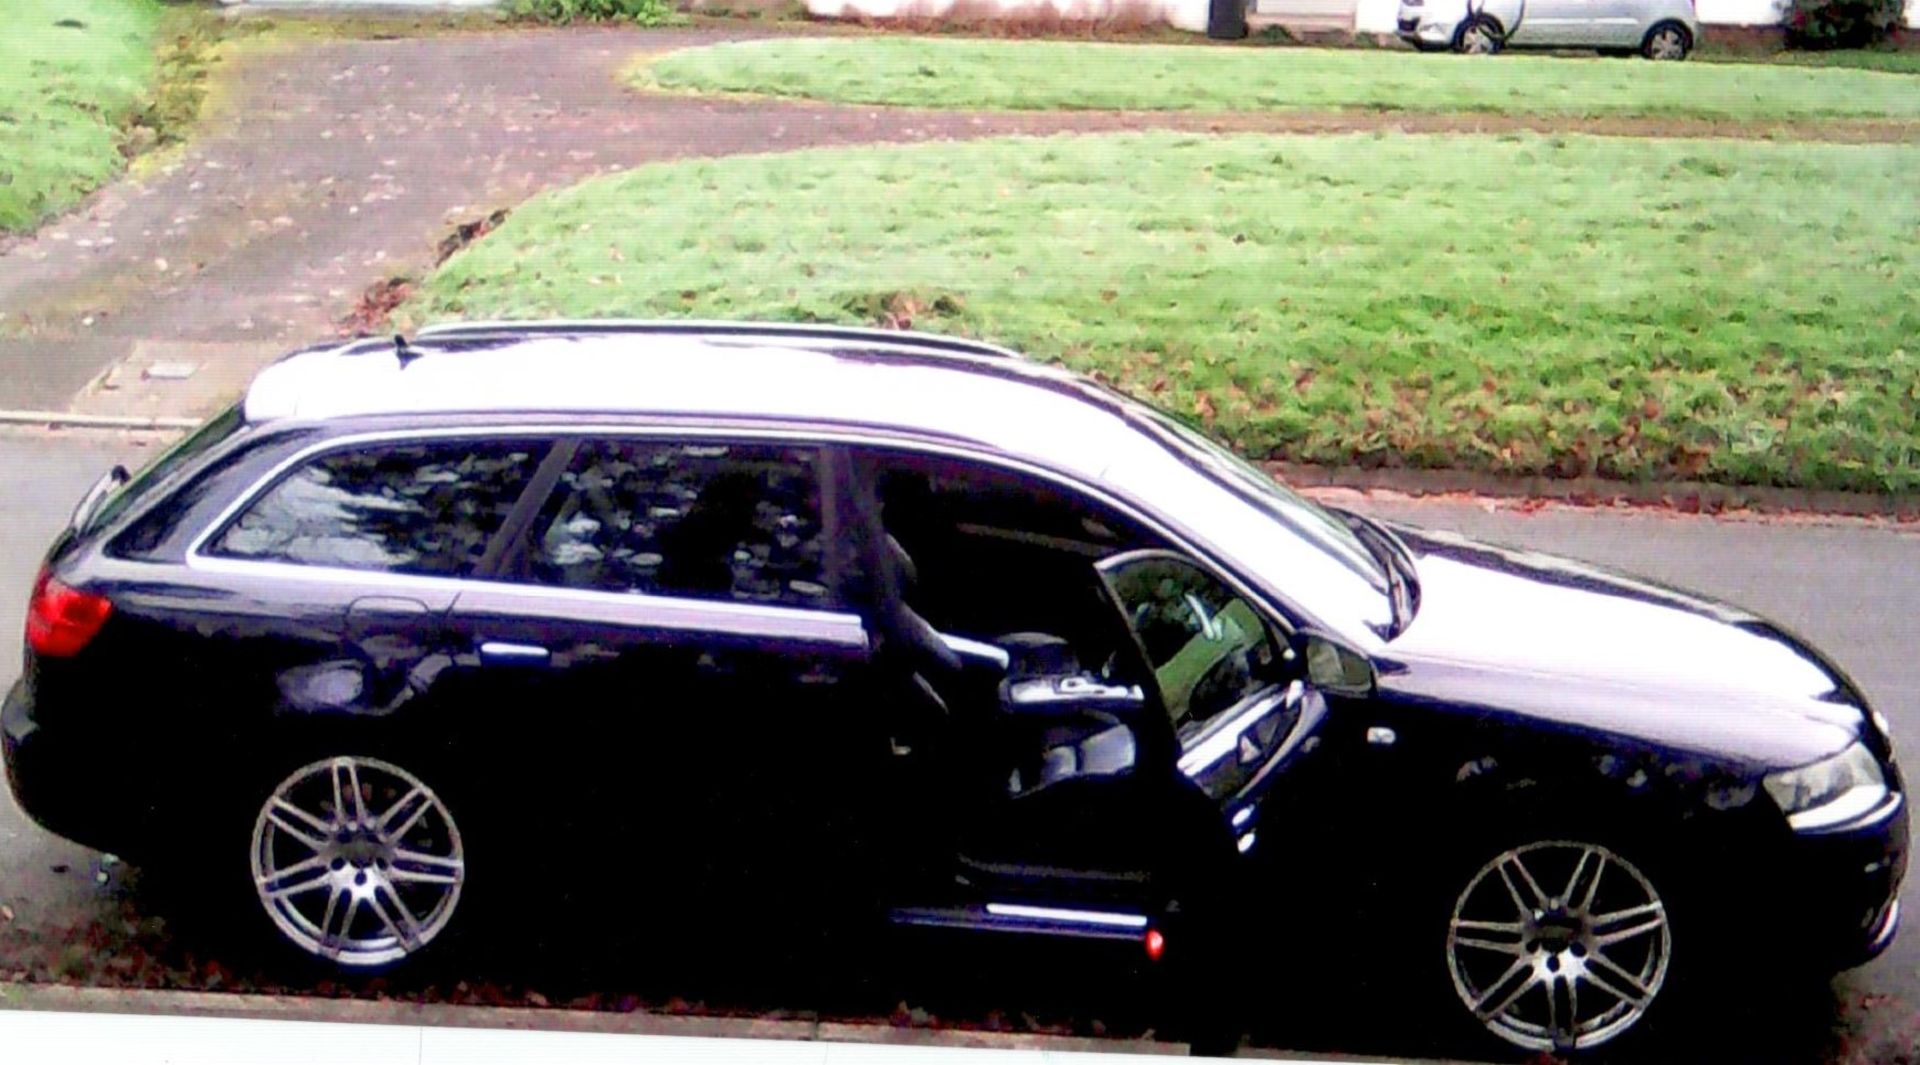 2007 Audi A6 Avant 2.7 TDi Registration number OY57 NFH Chassis number WAUZZZ4F58N016755 Engine - Image 11 of 17